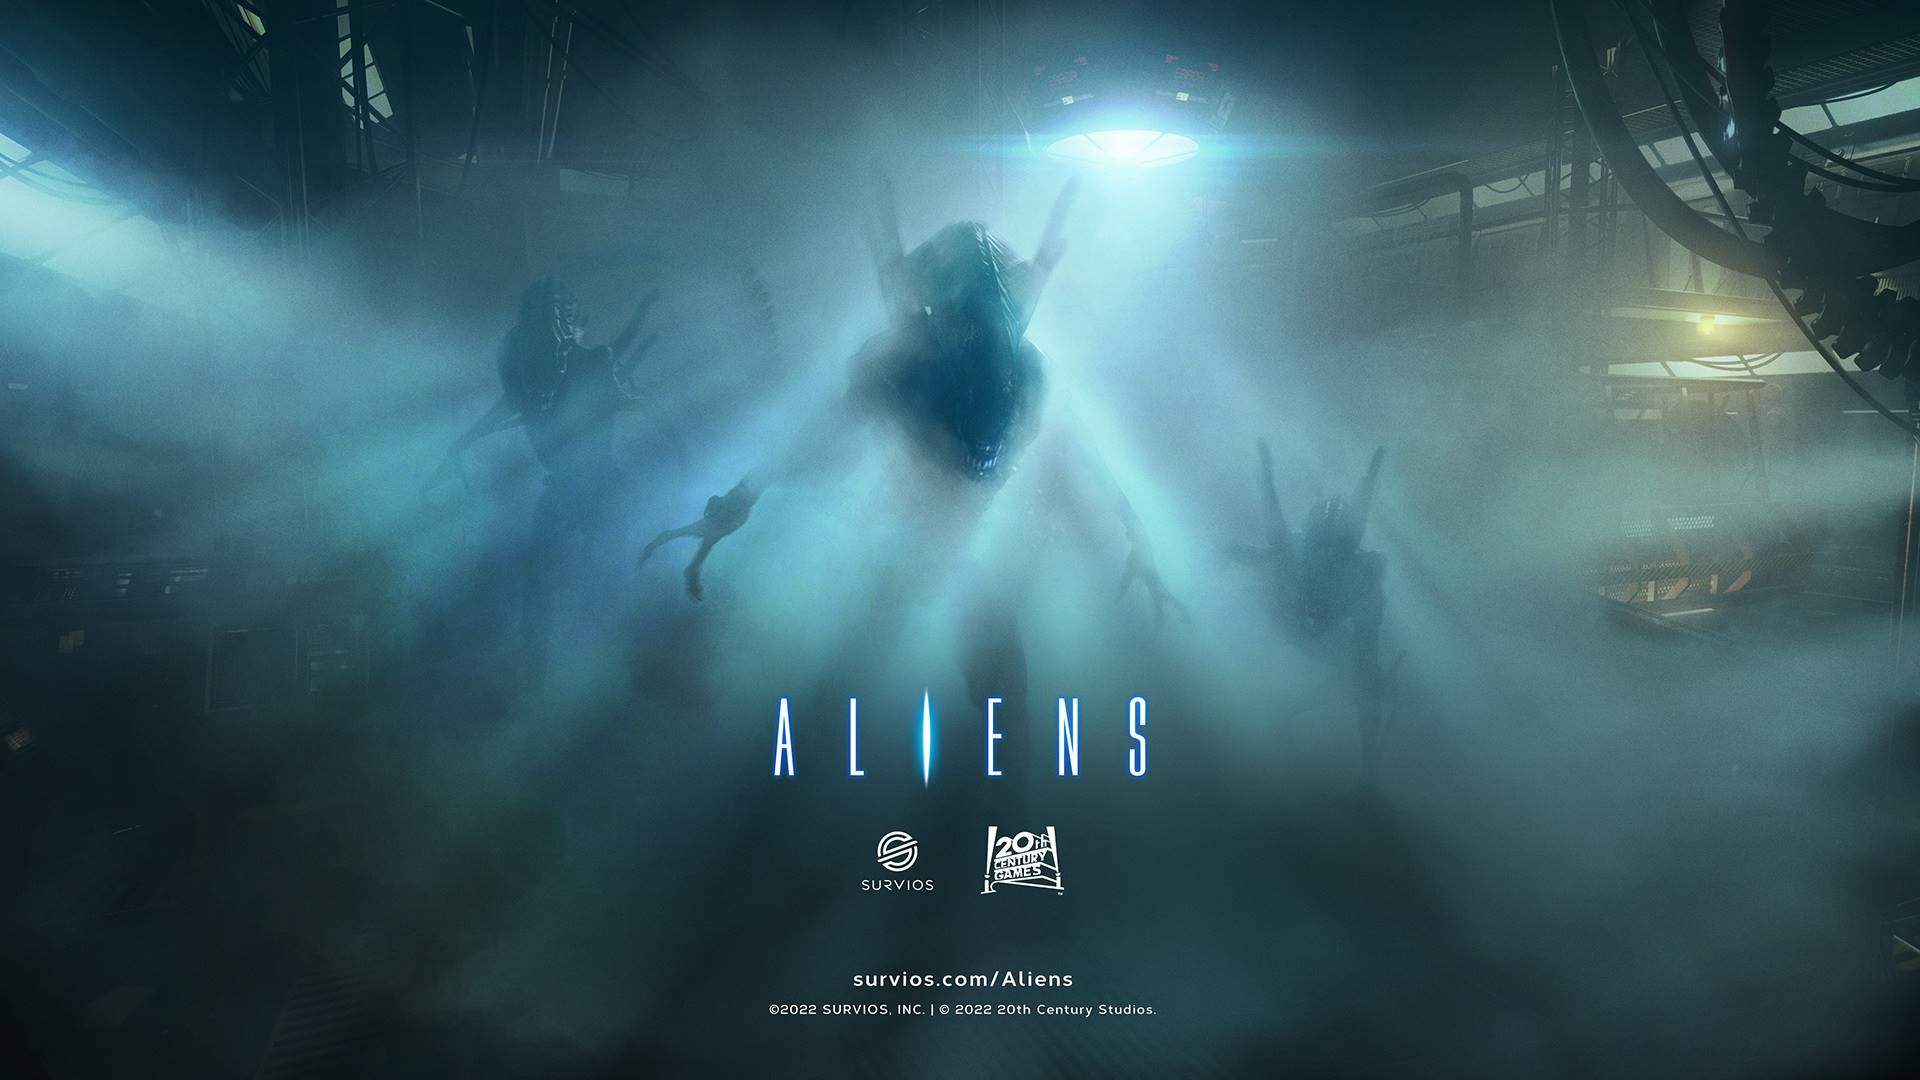 aliens game from survios  Image of aliens game from survios